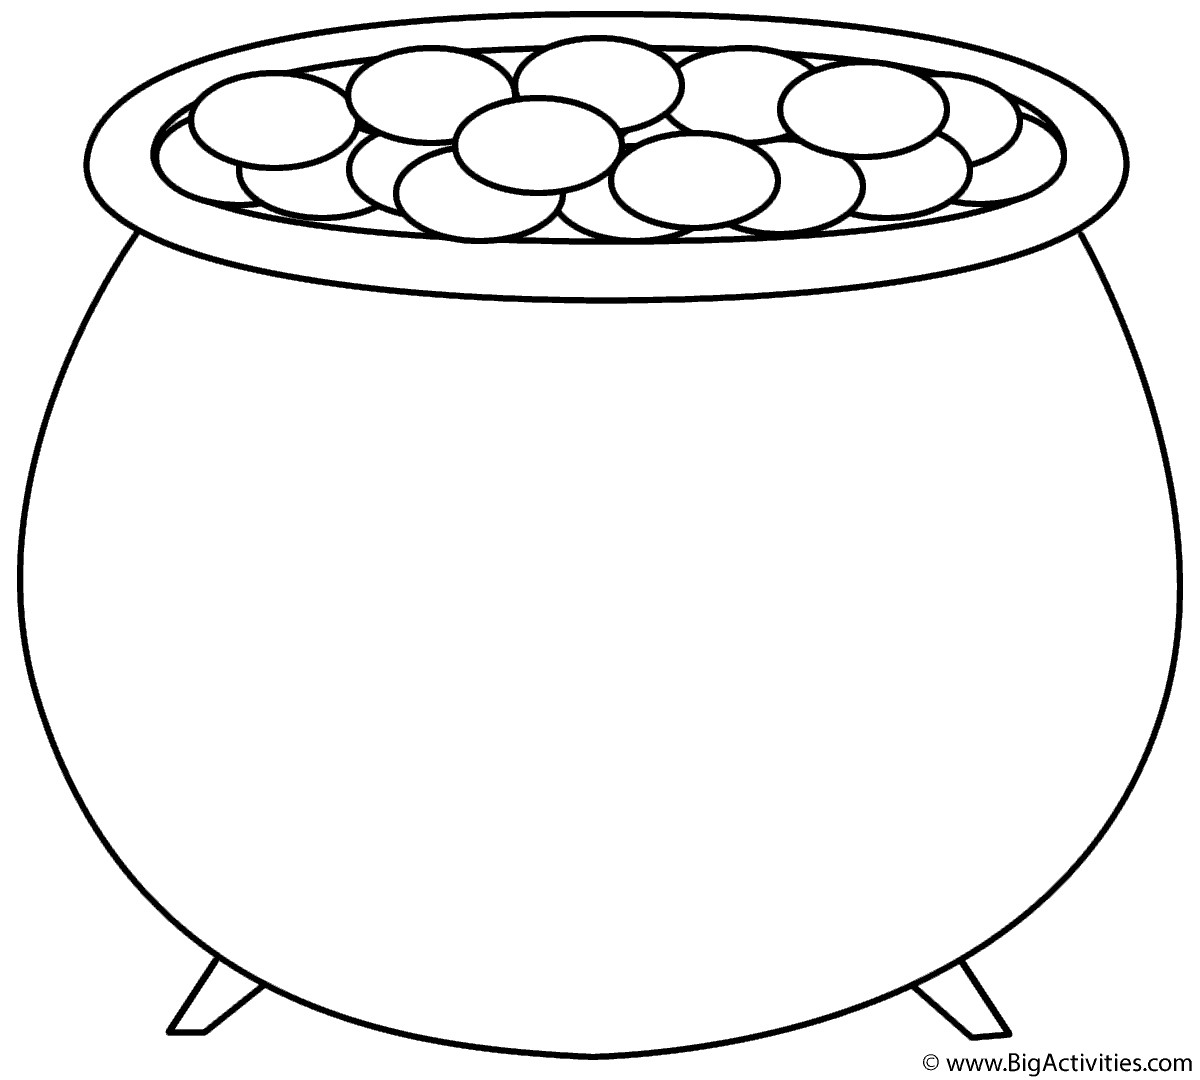 Download Pot of Gold - Coloring Page (St. Patrick's Day)